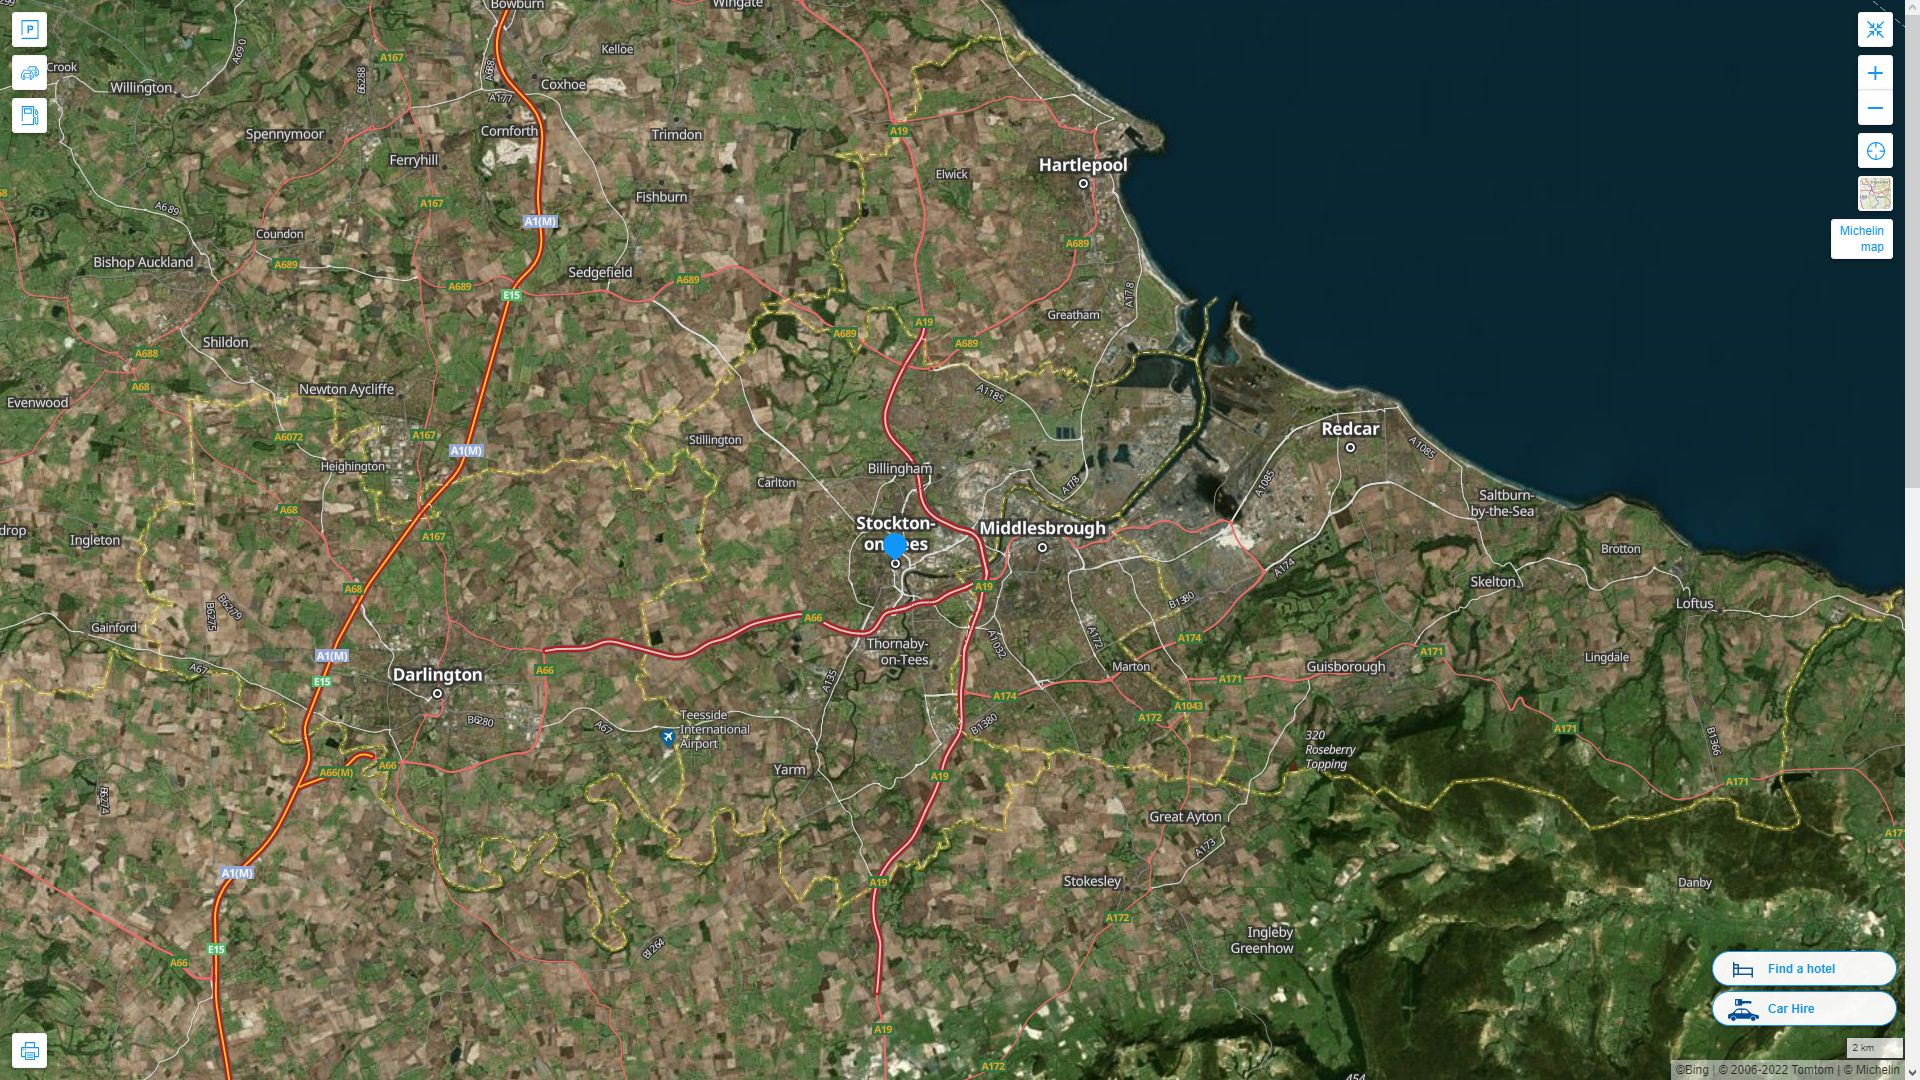 Stockton on Tees Highway and Road Map with Satellite View